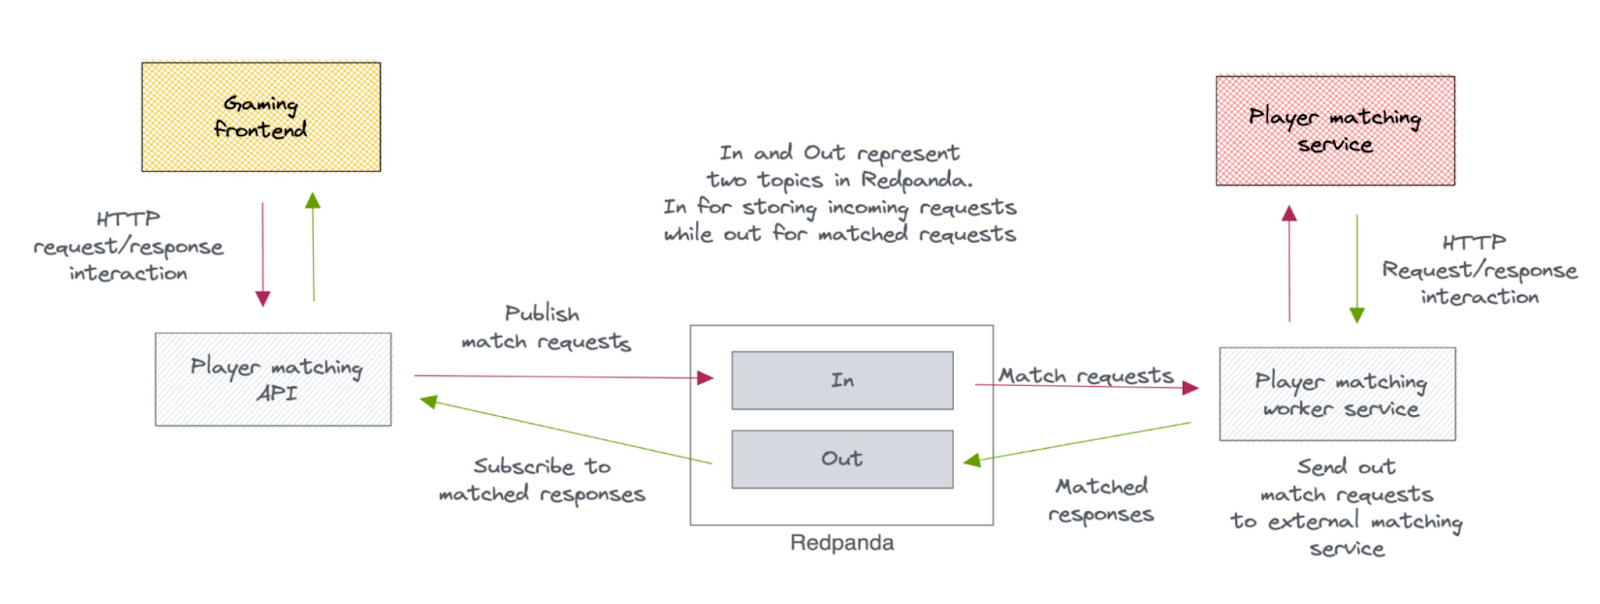 A scalable and reliable real-time player matching solution with Redpanda as the event broker